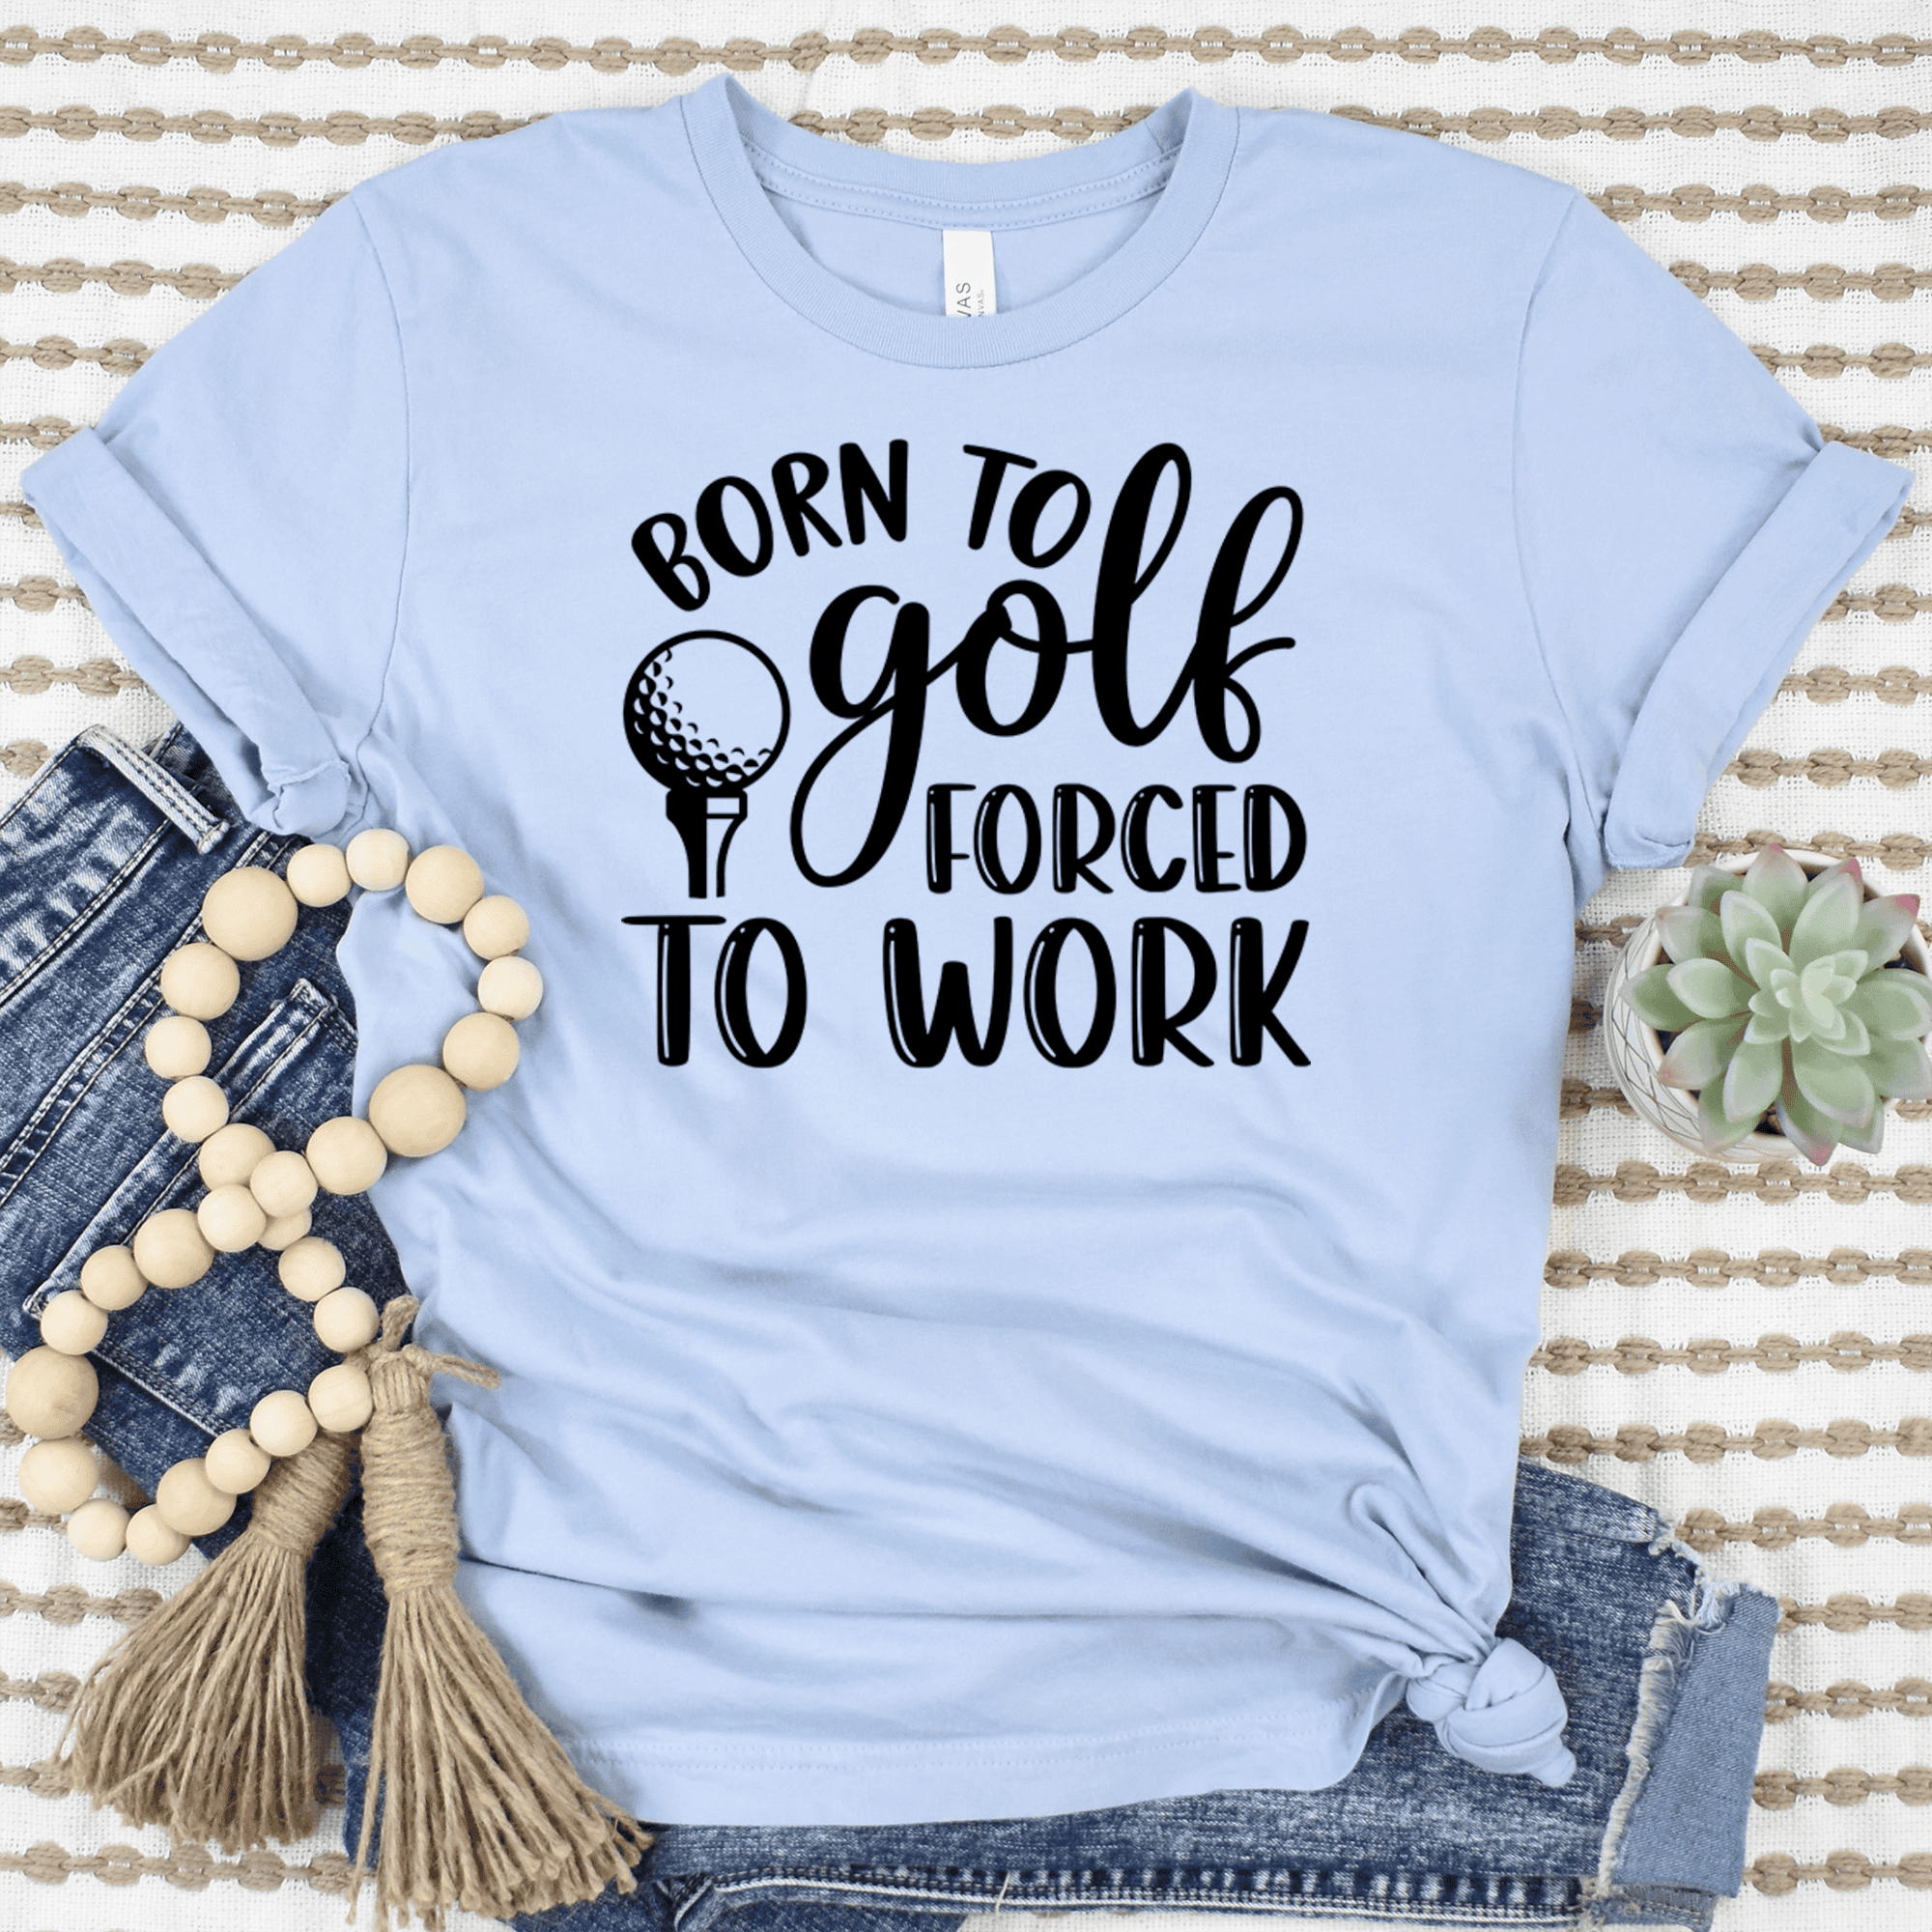 Womens Light Blue T Shirt with This-Girls-Born-To-Golf design